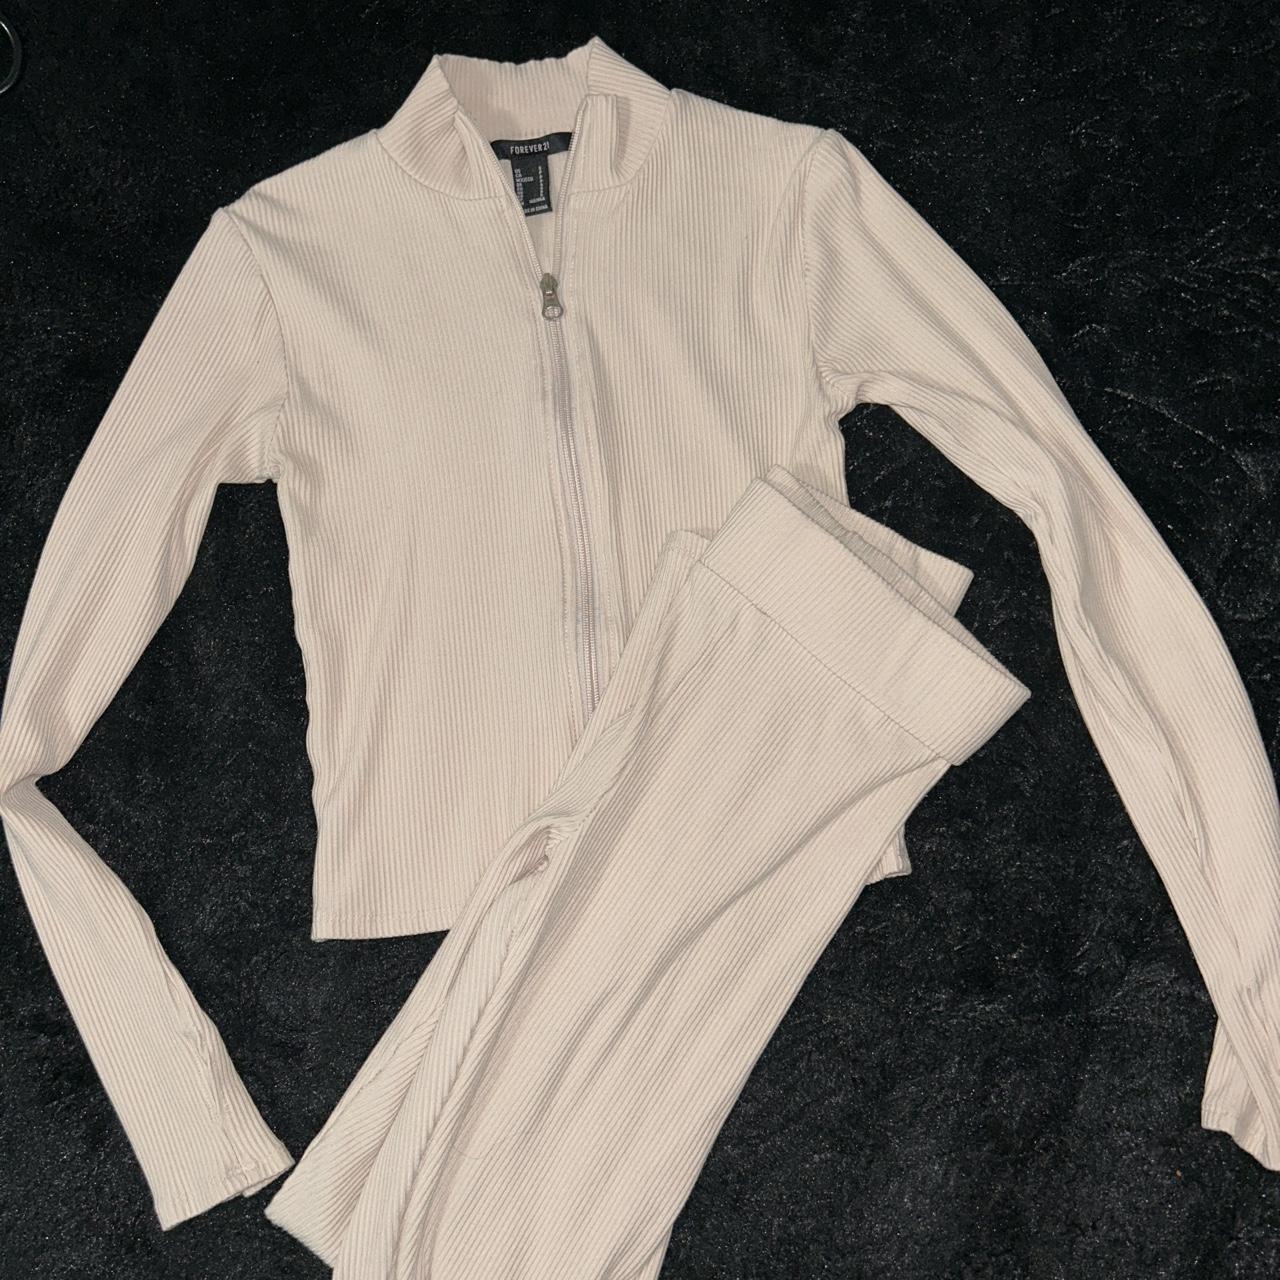 Forever 21 | Pants & Jumpsuits | Womans Forever 2 Cream Colored Flare Pants  | Poshmark